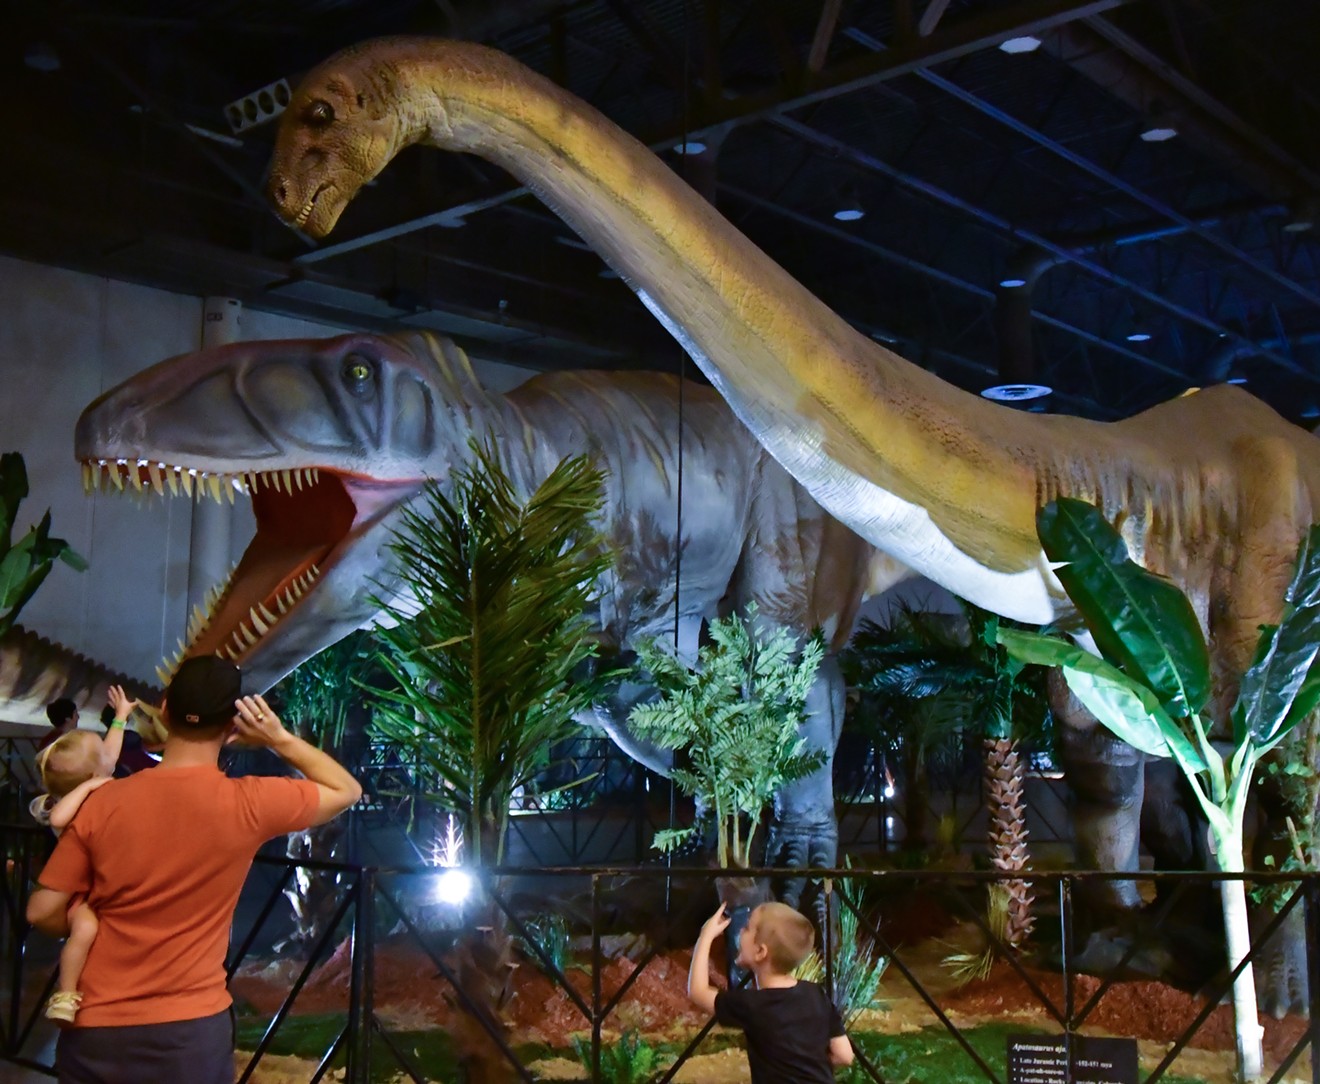 Jurassic Quest brings dinos to life this weekend.